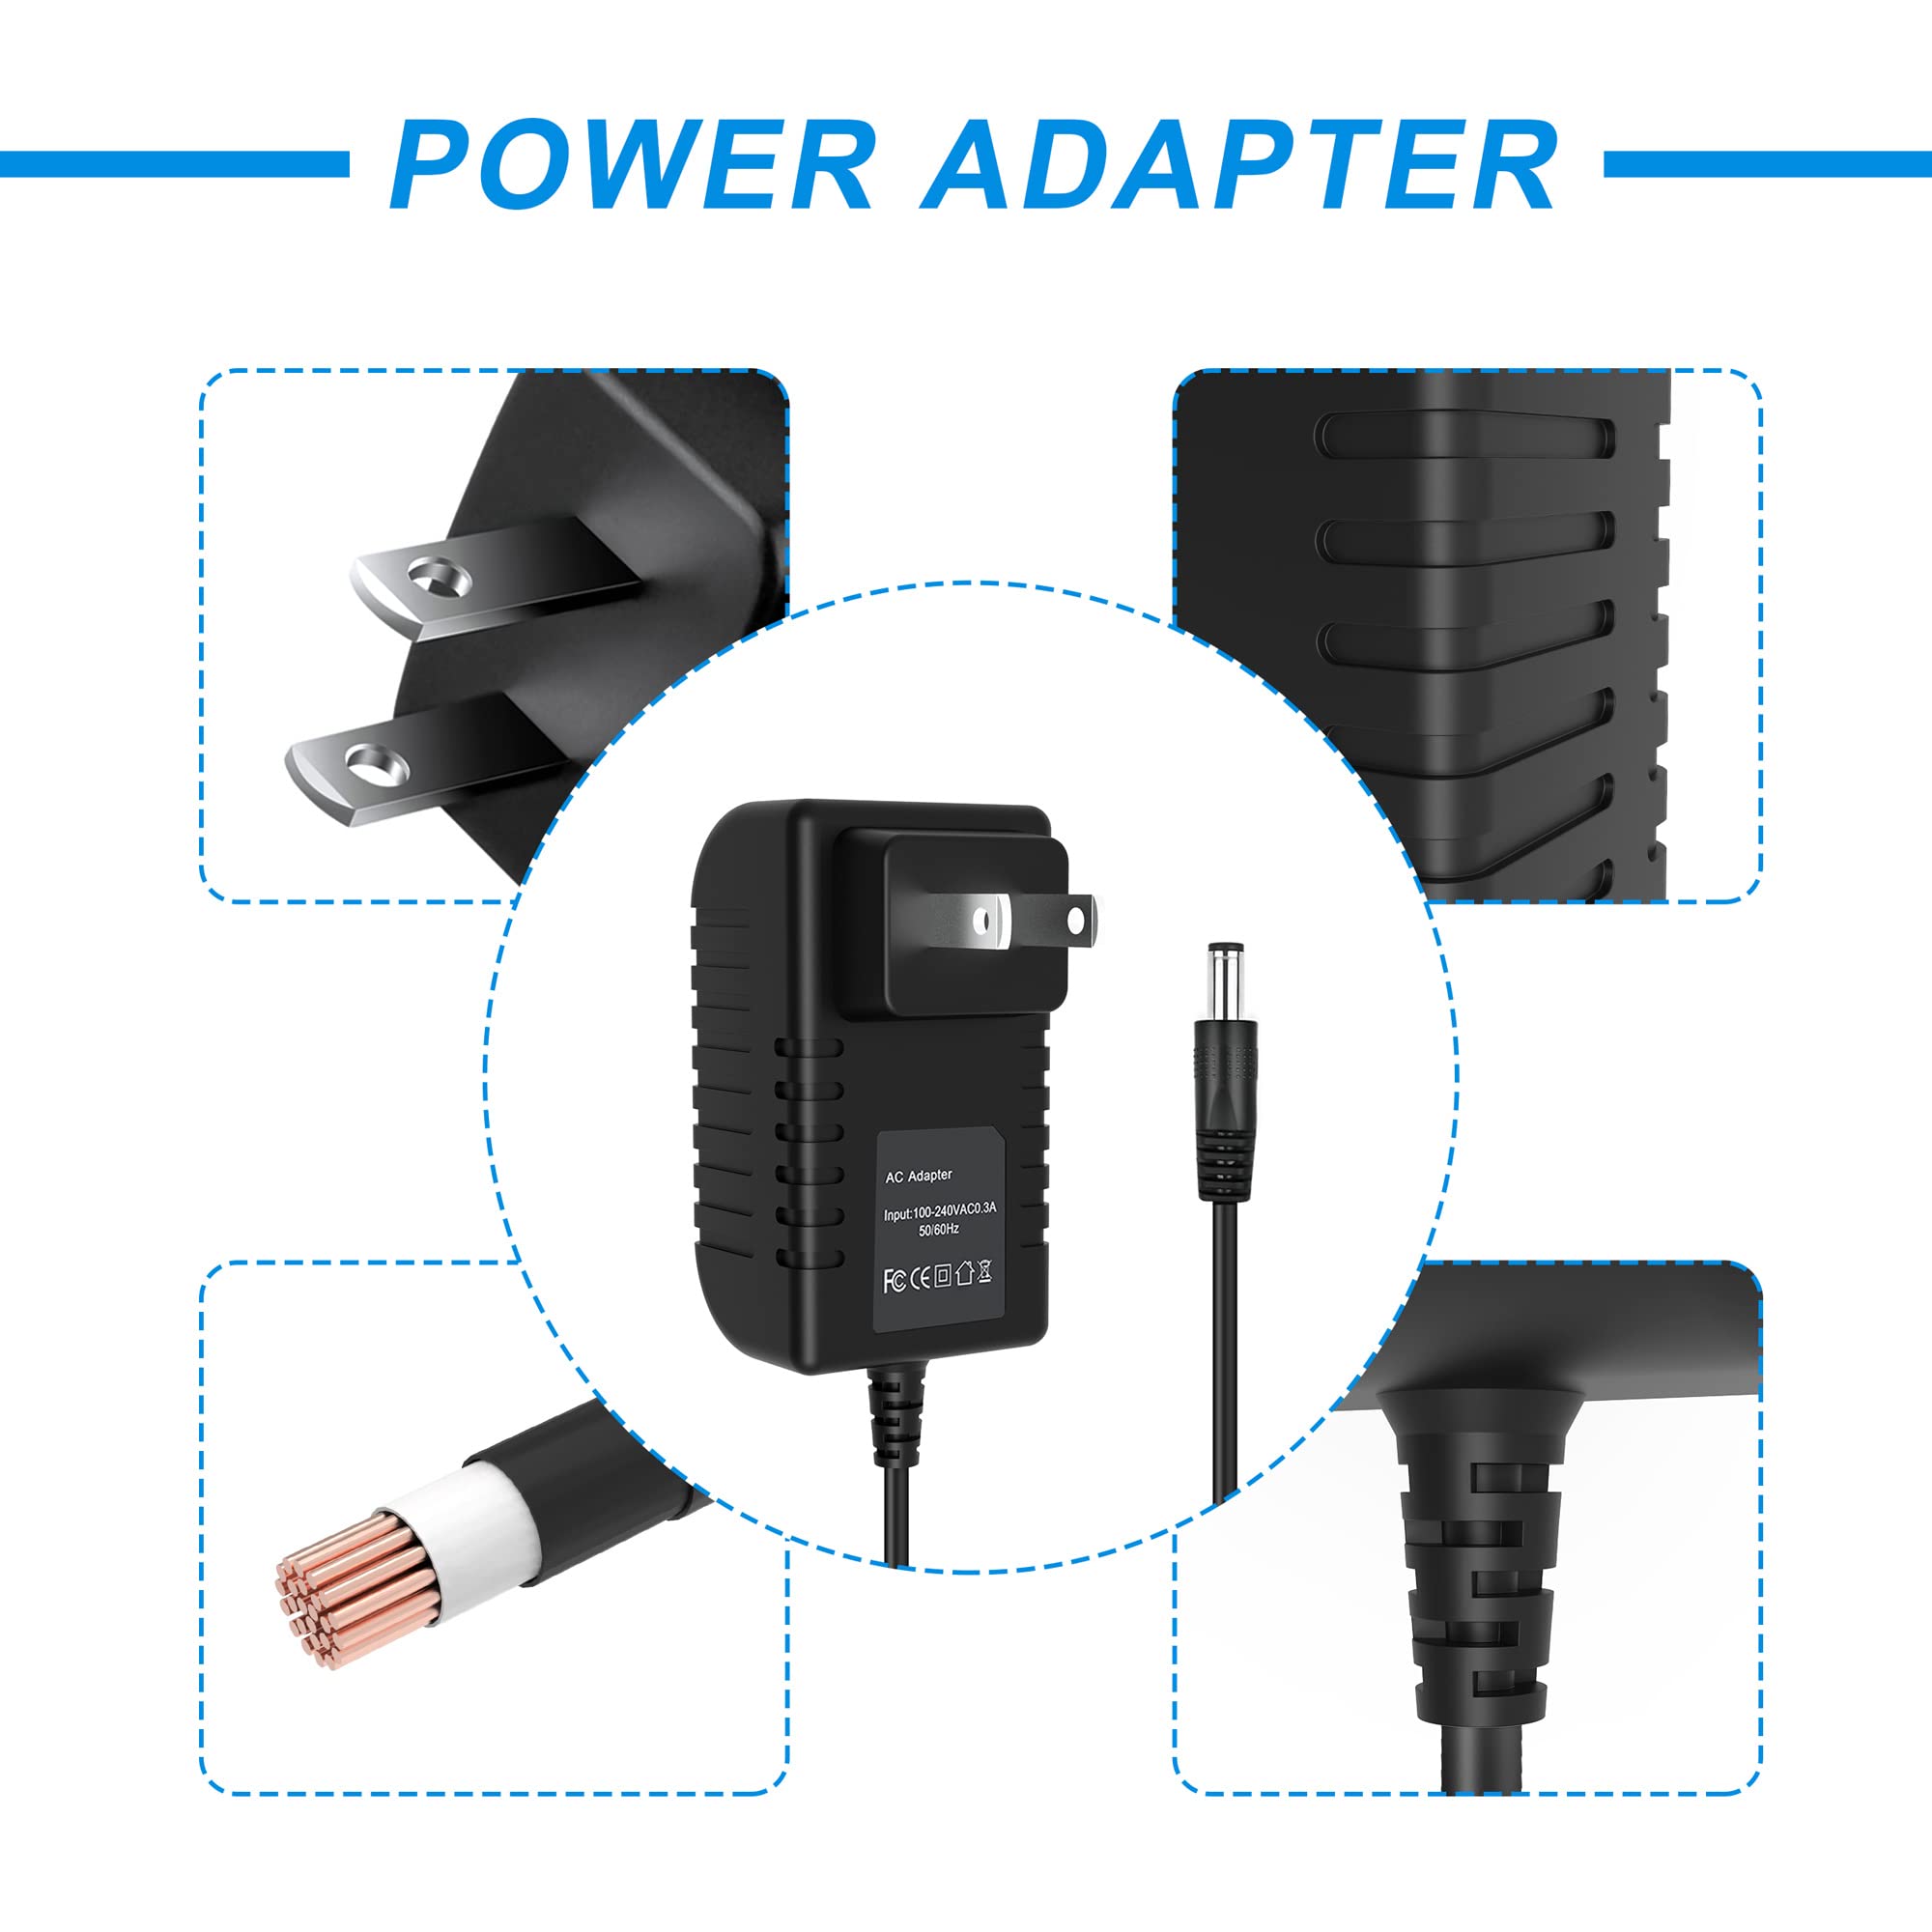 J-ZMQER 12V 1A AC Adapter Compatible with PetSafe PIF00-13210 Stay & Play Wireless Fence Transmitter